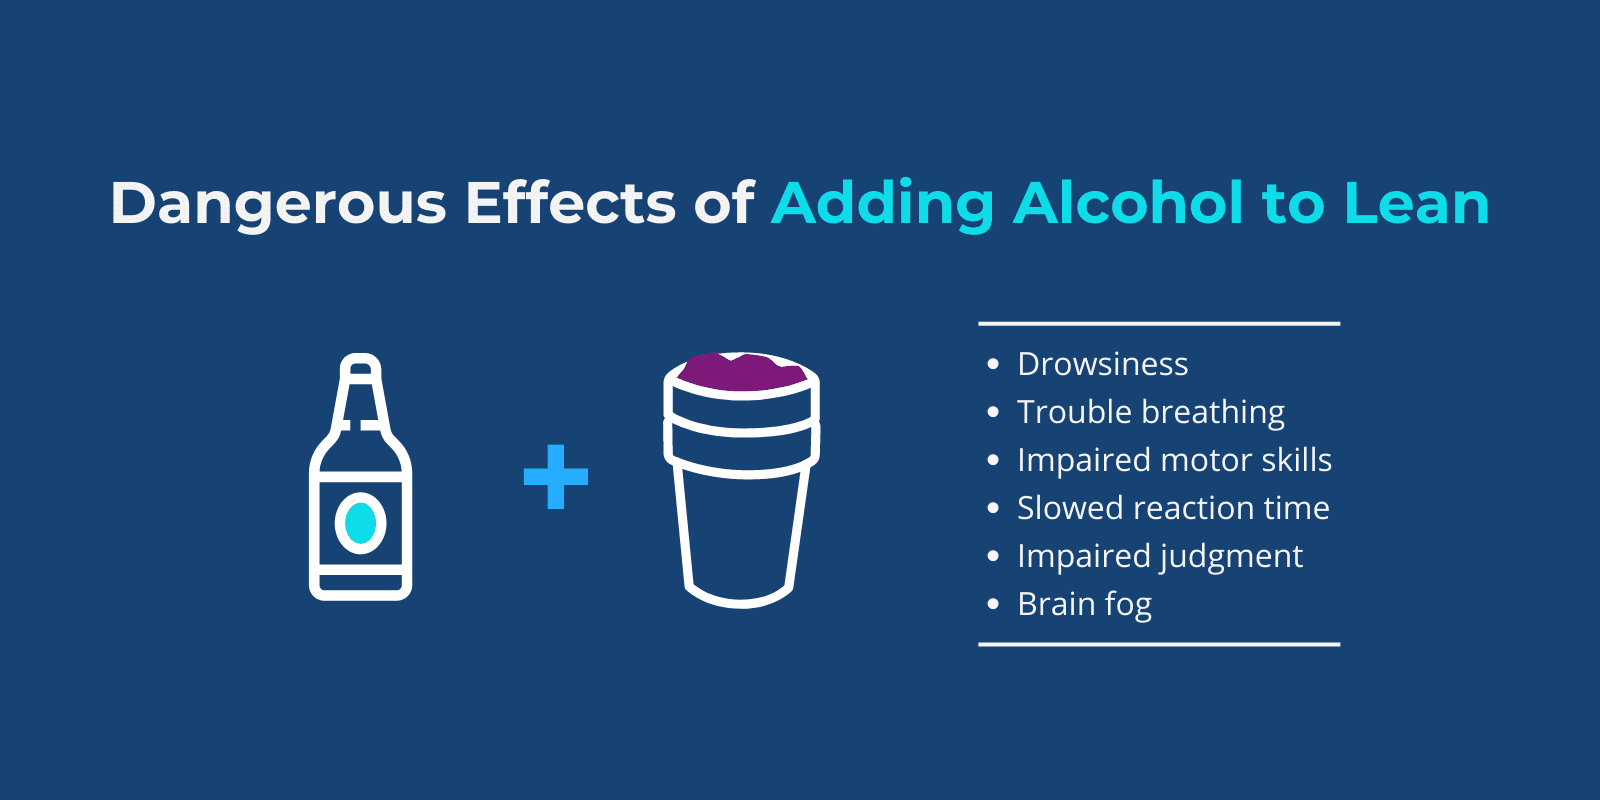 "Dangerous Effects Of Adding Alcohol To Lean" title written above an alcohol icon, "+", a lean icon, and a list of dangerous effects